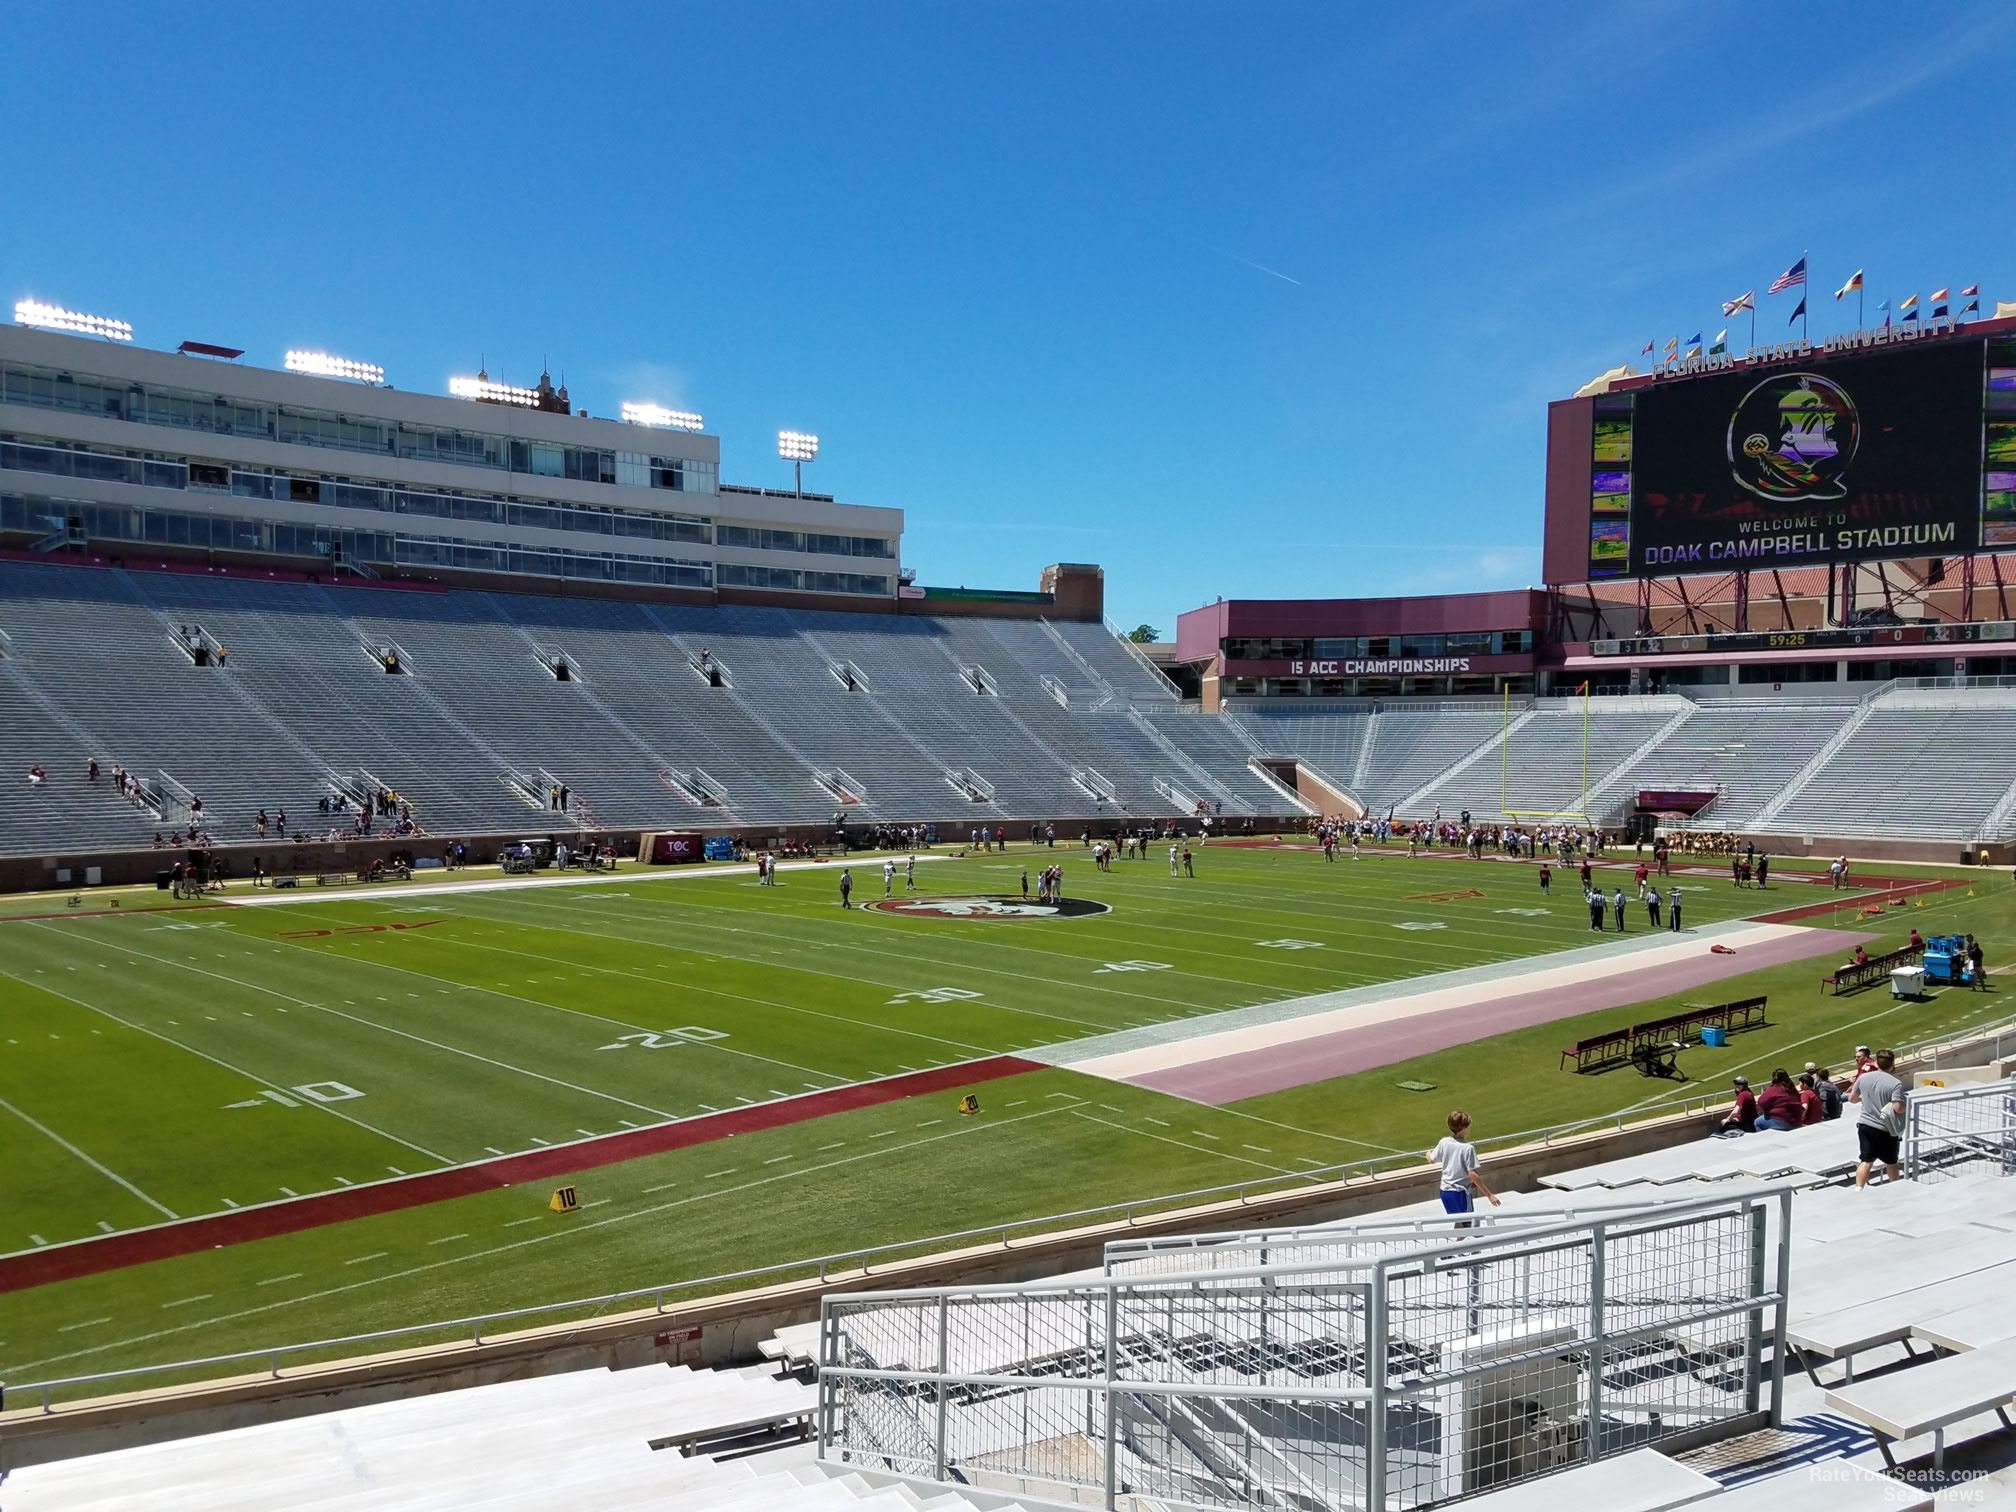 section 14, row 25 seat view  - doak campbell stadium